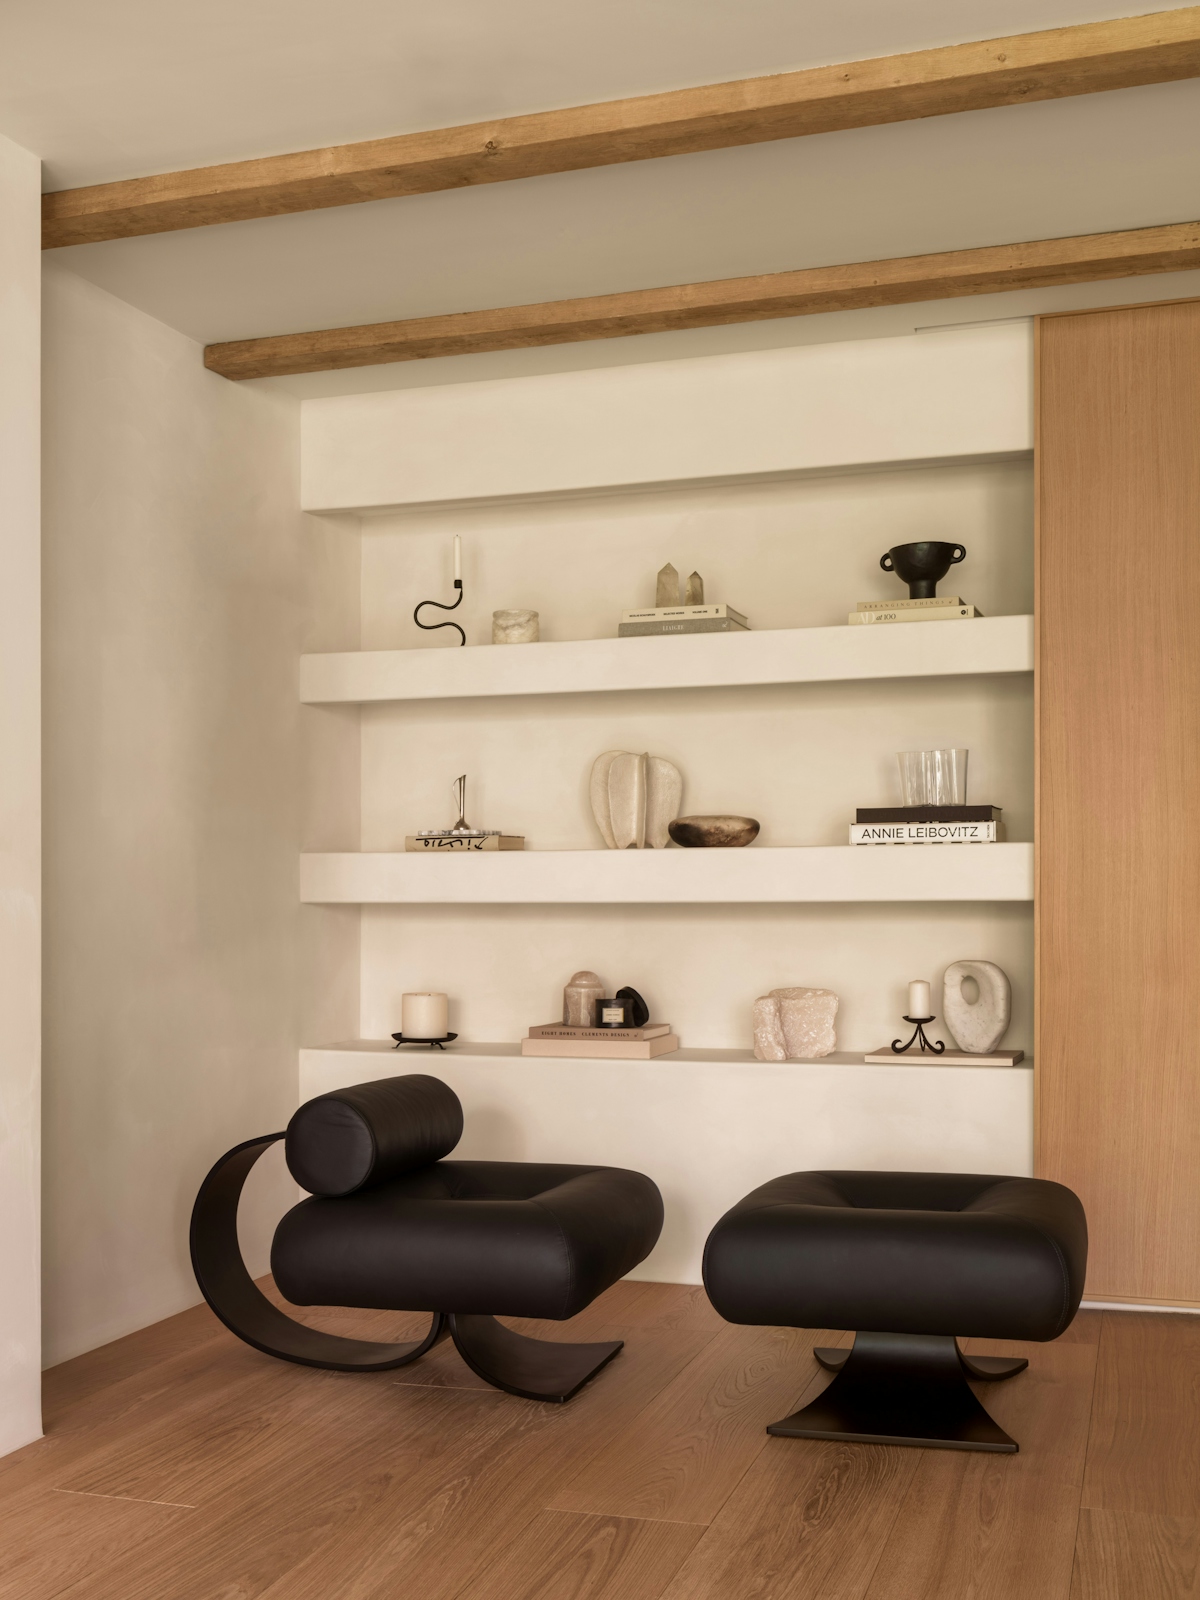 Covet Noir shelving with abstract ornaments and two minimalist black stools